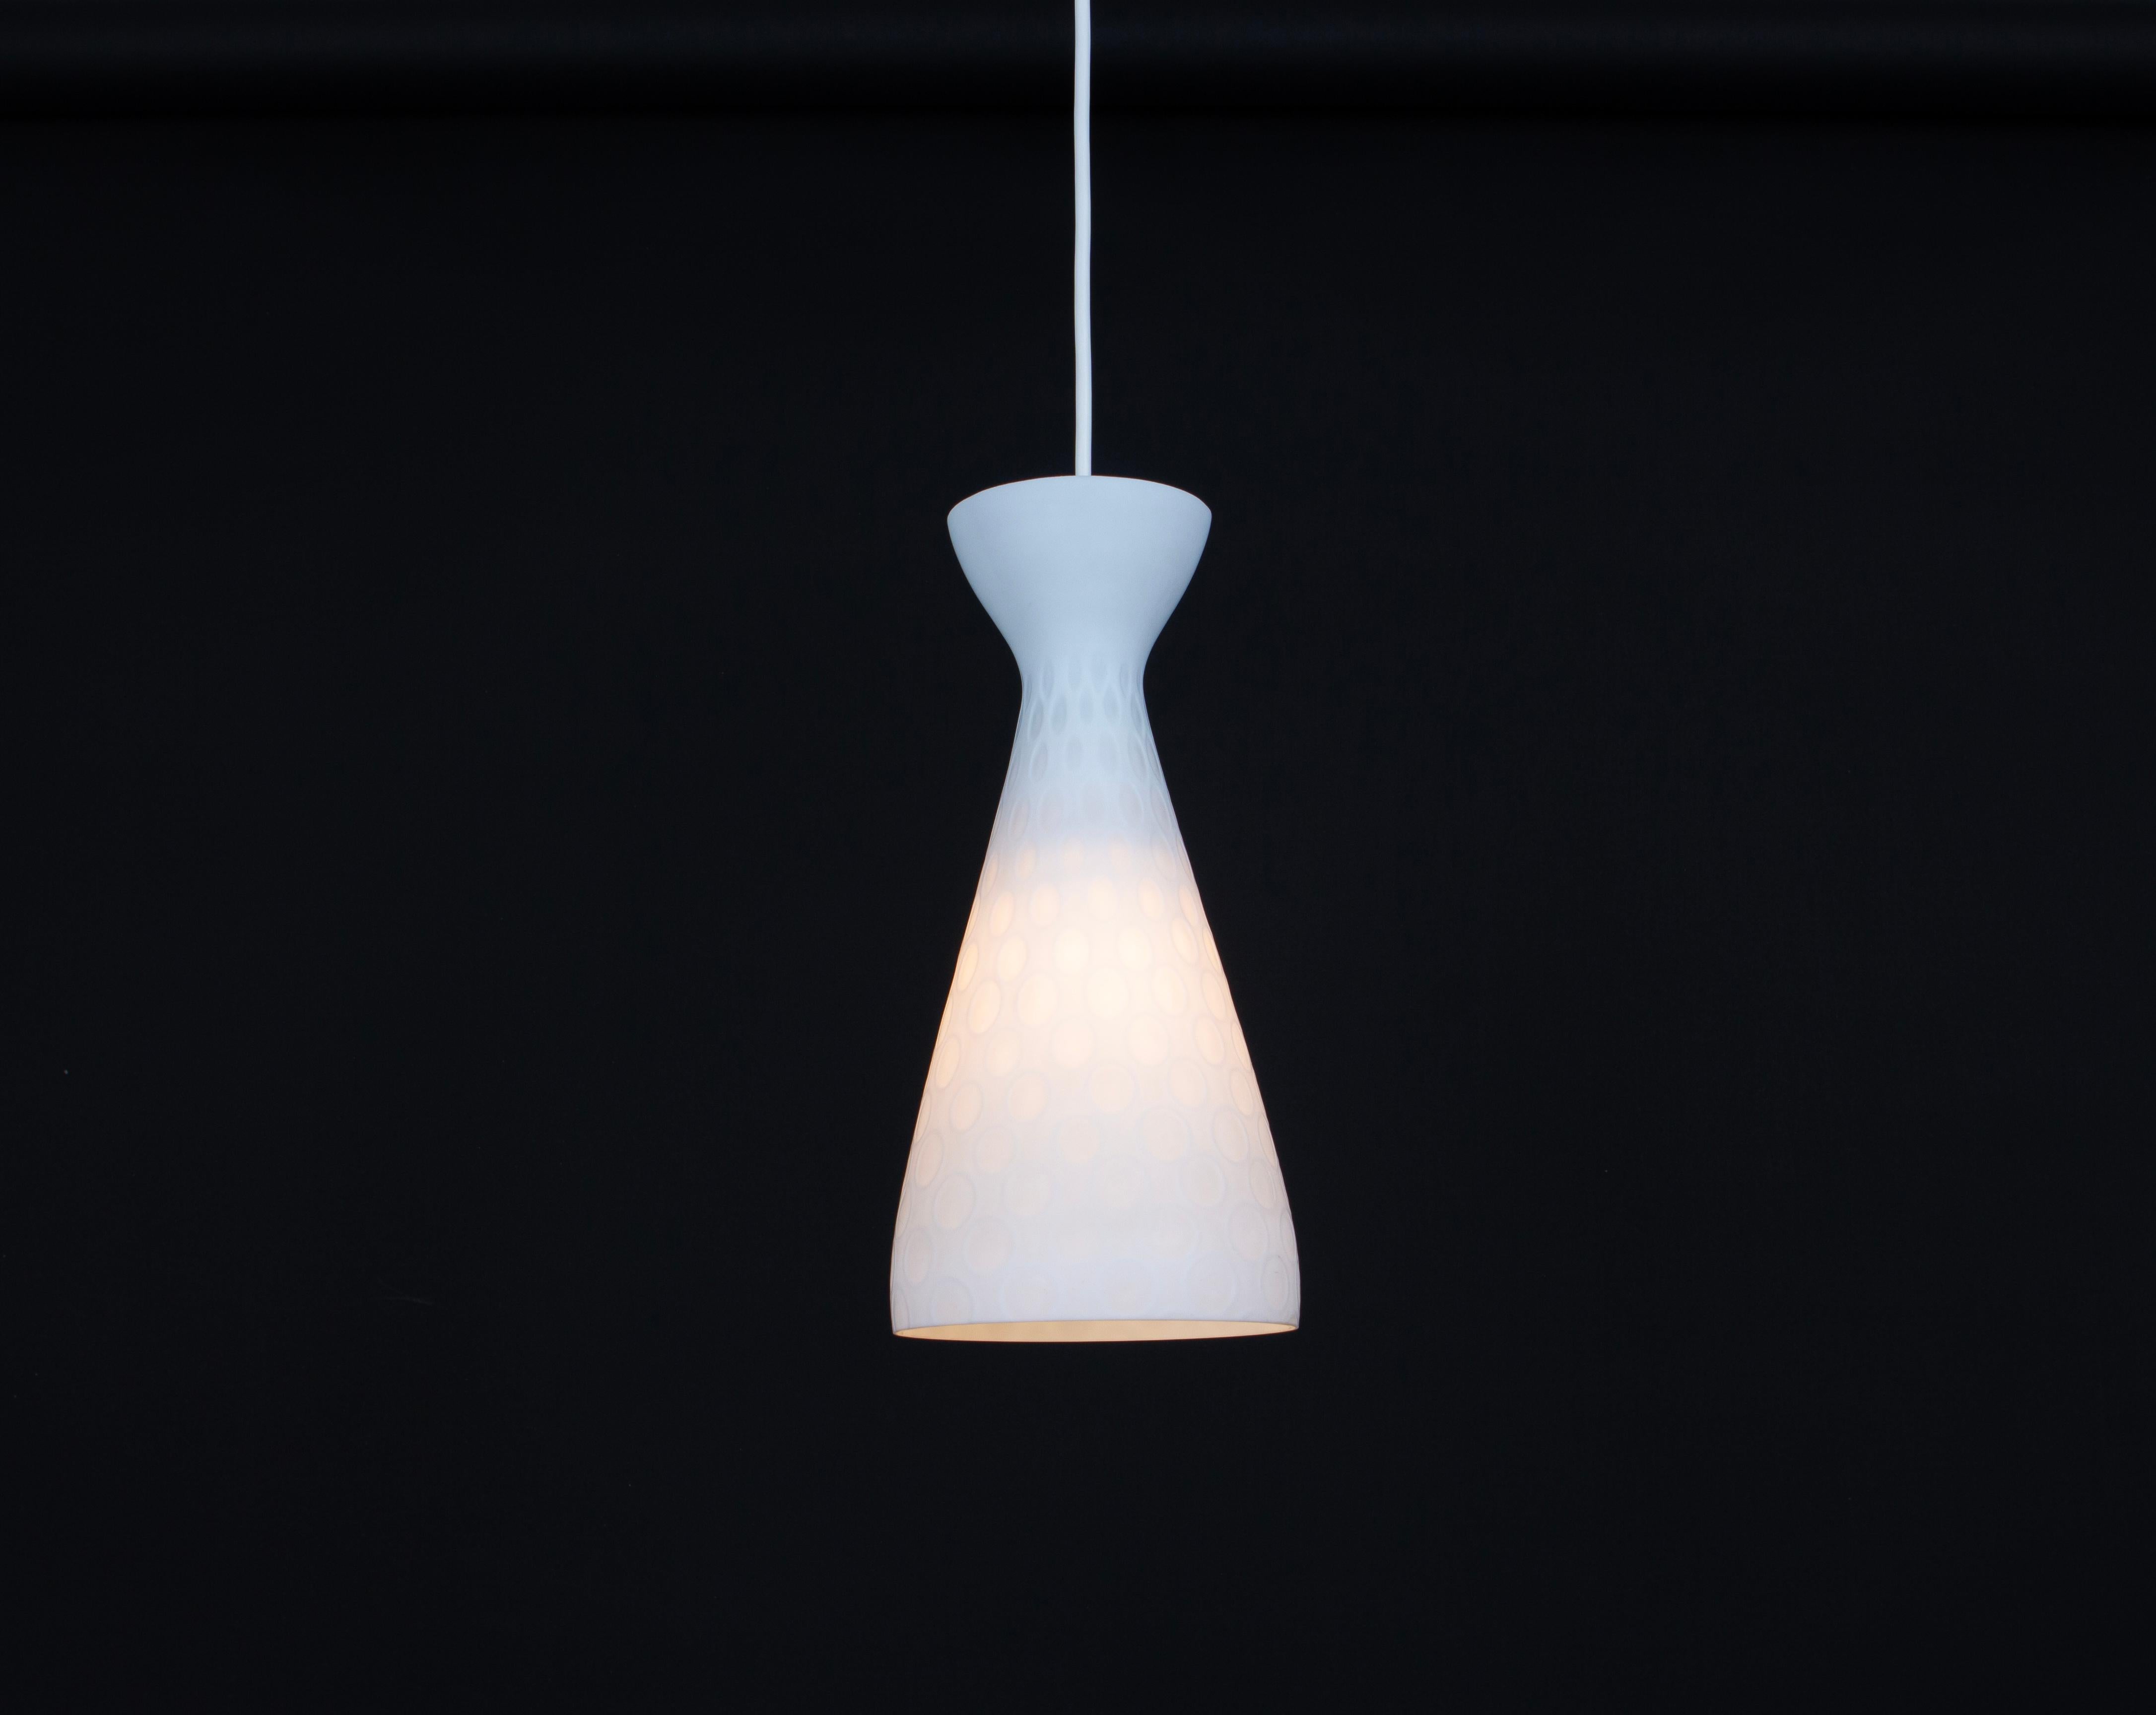 1 of 2 Petite Pendant Lights by Gangkofner, Peill & Putzler, Germany, 1950s For Sale 3